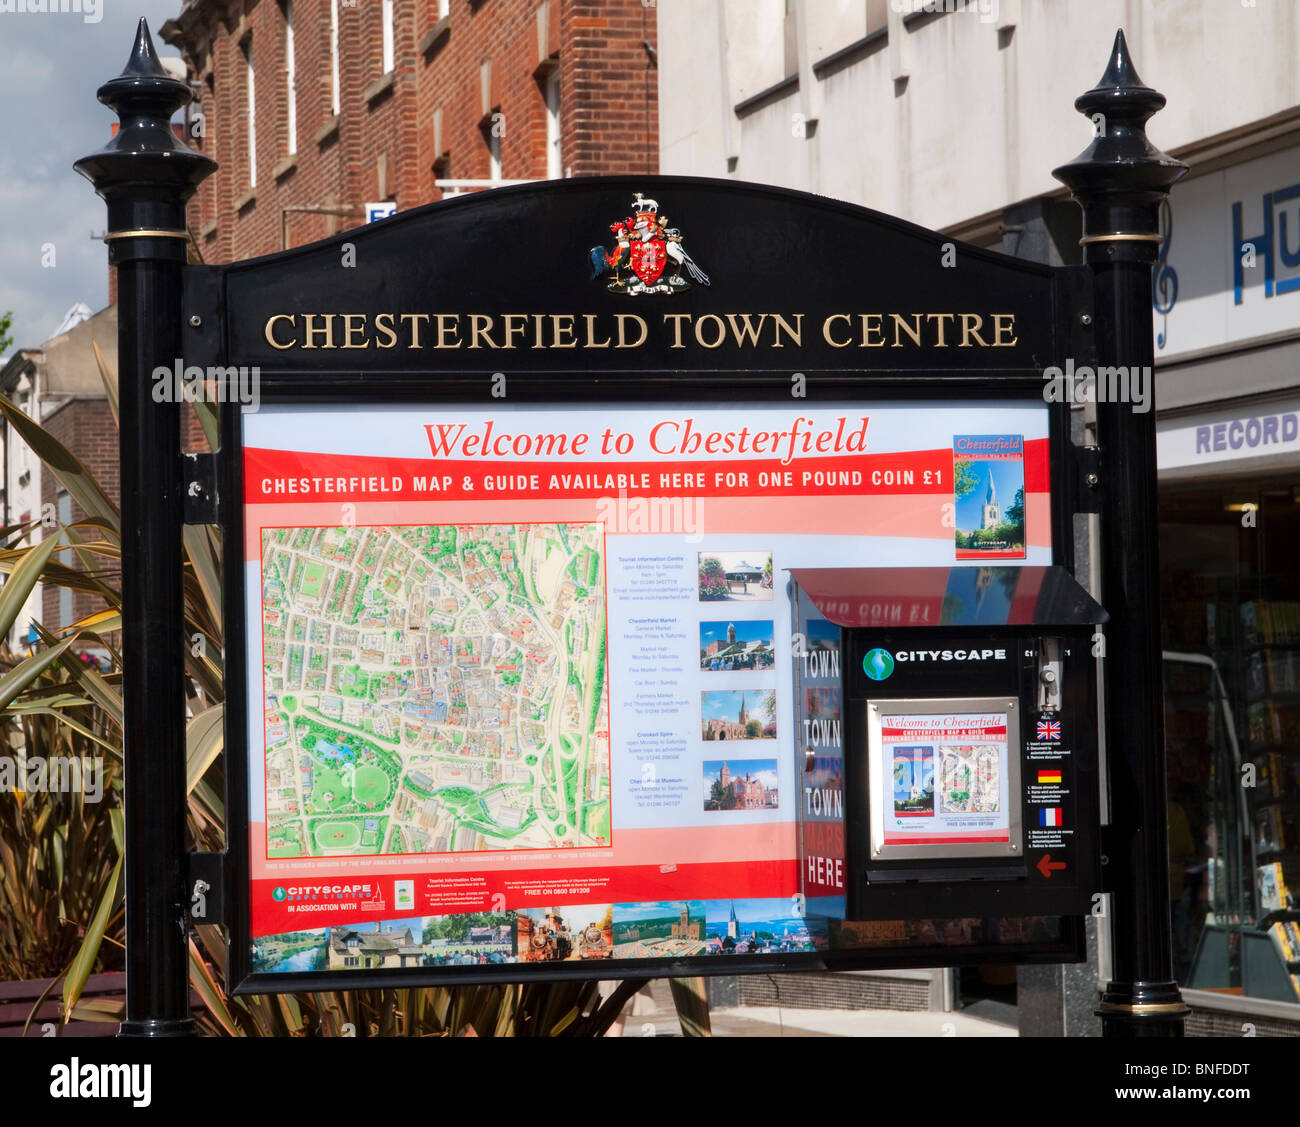 A Welcome to Chesterfield Town Center Map and Information Panel, Chesterfield Derbyshire England UK Stock Photo